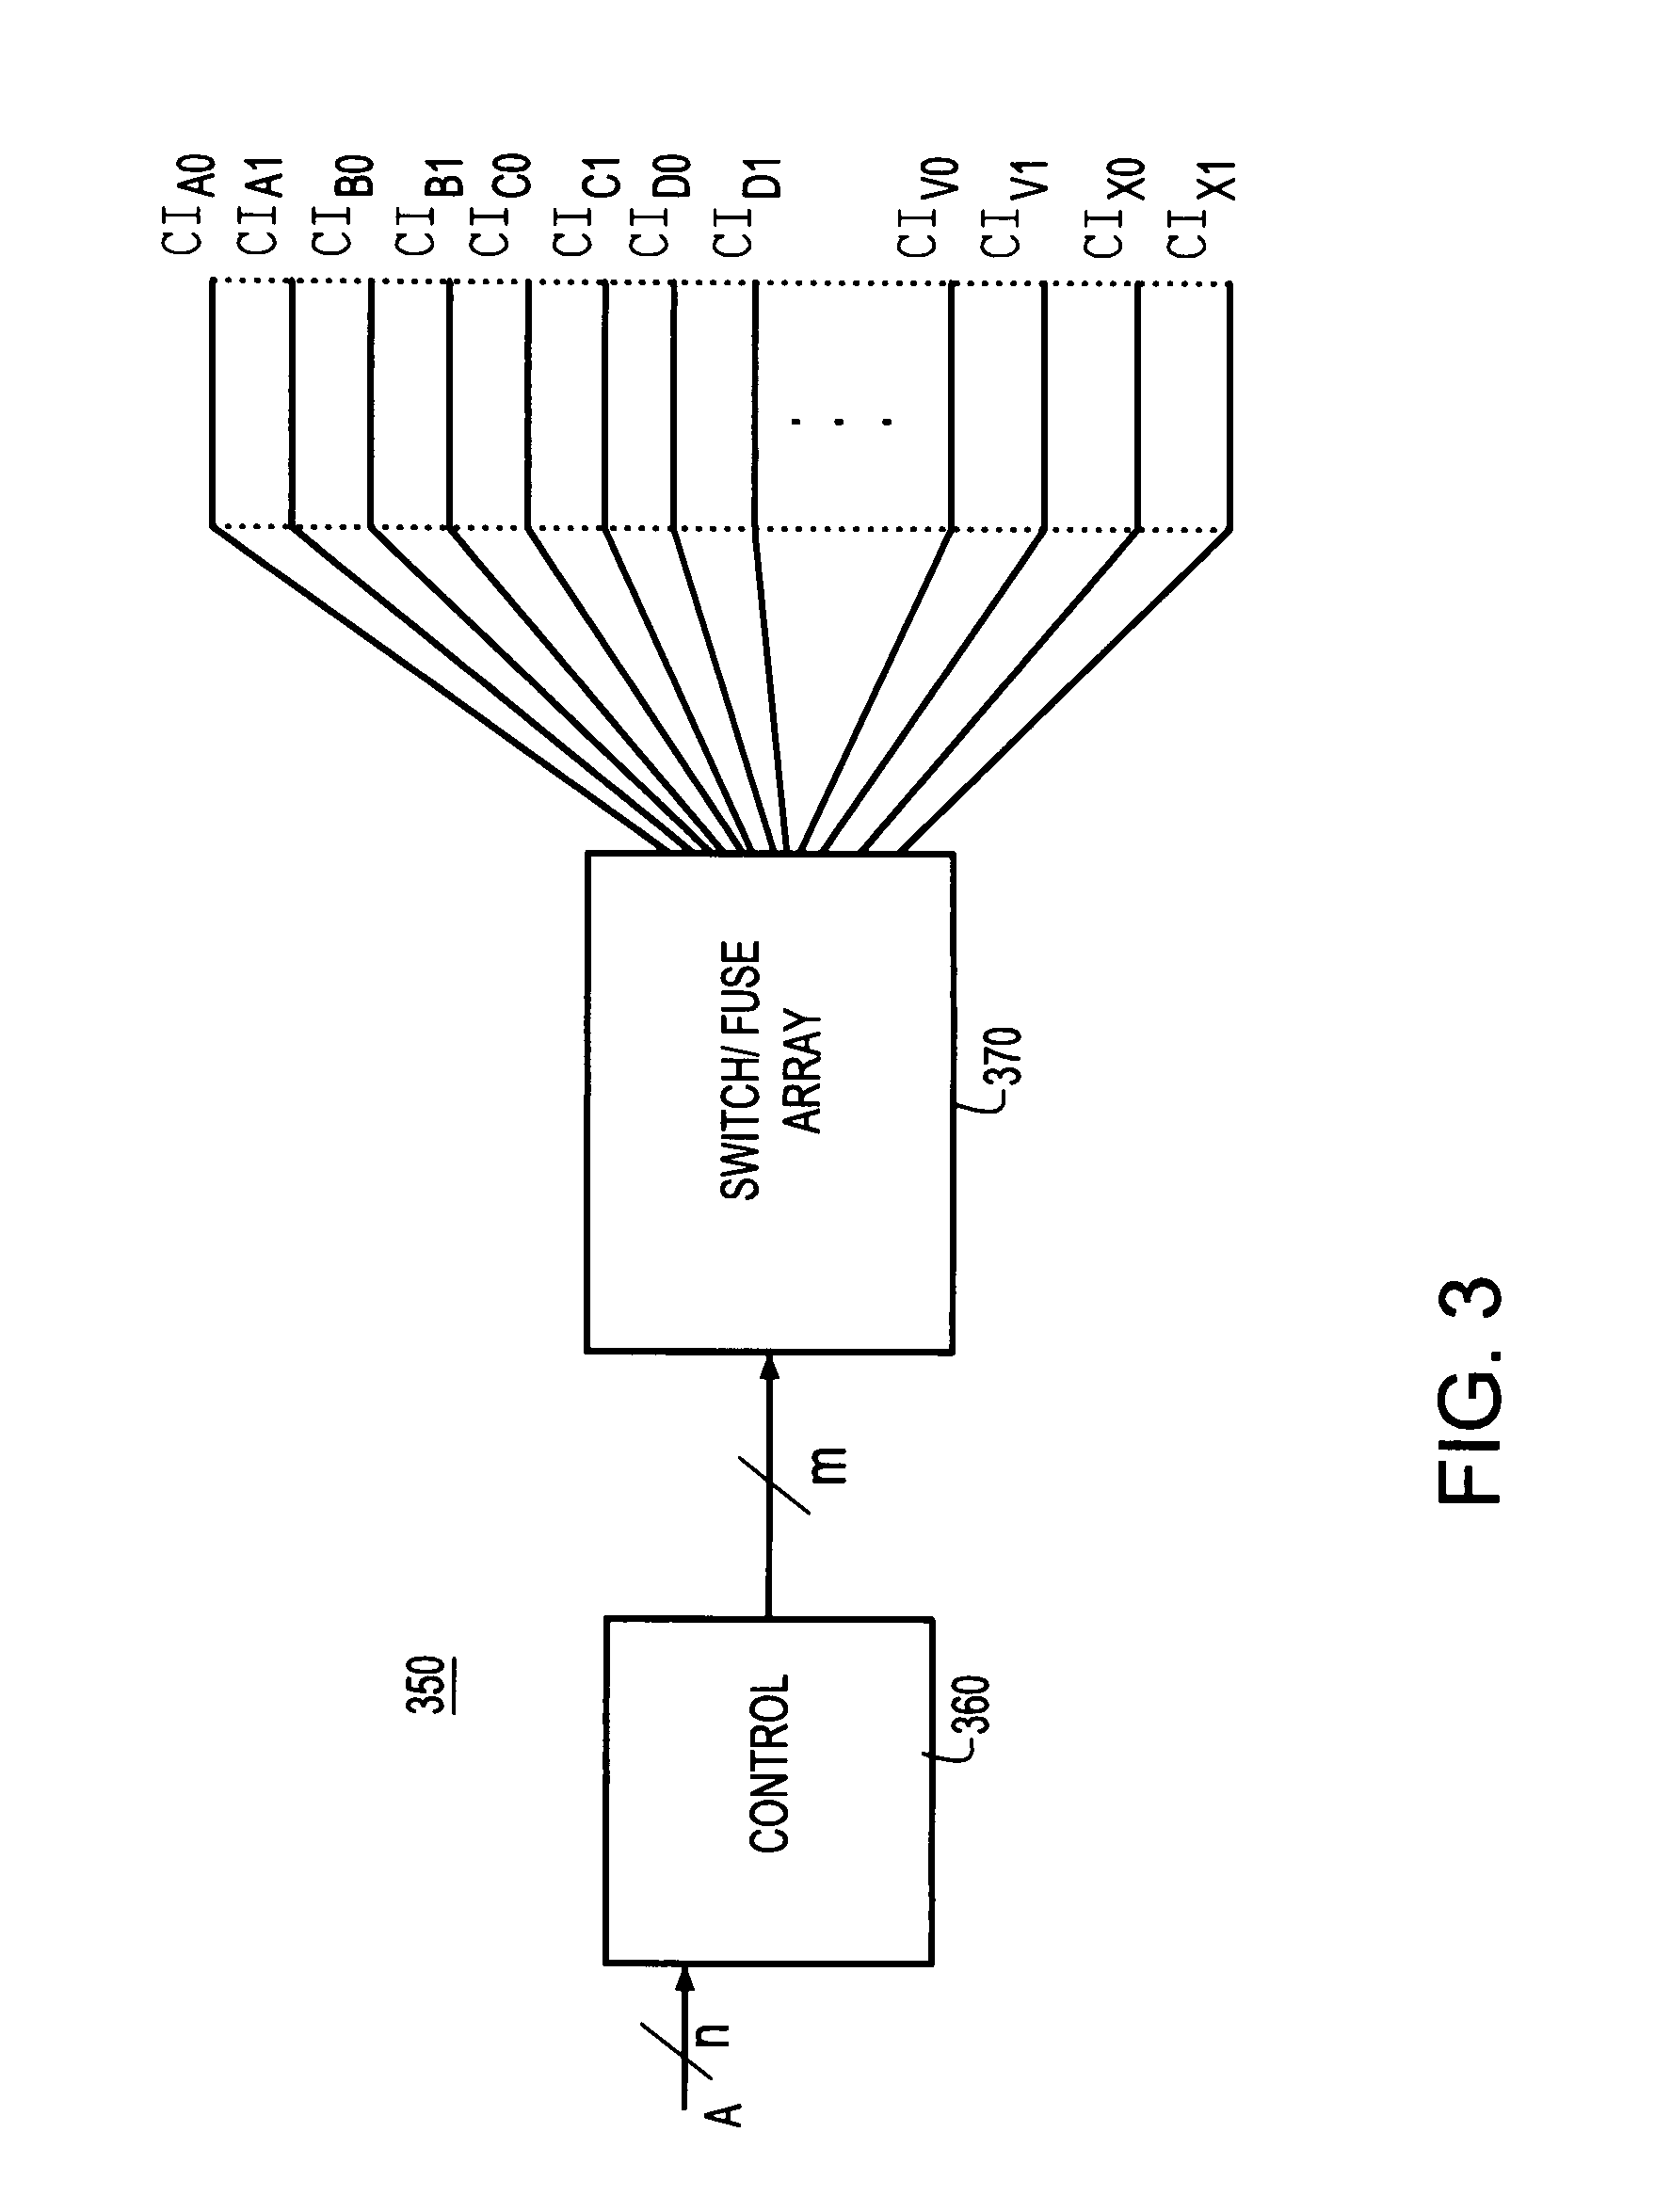 Structure for on-chip electromigration monitoring system